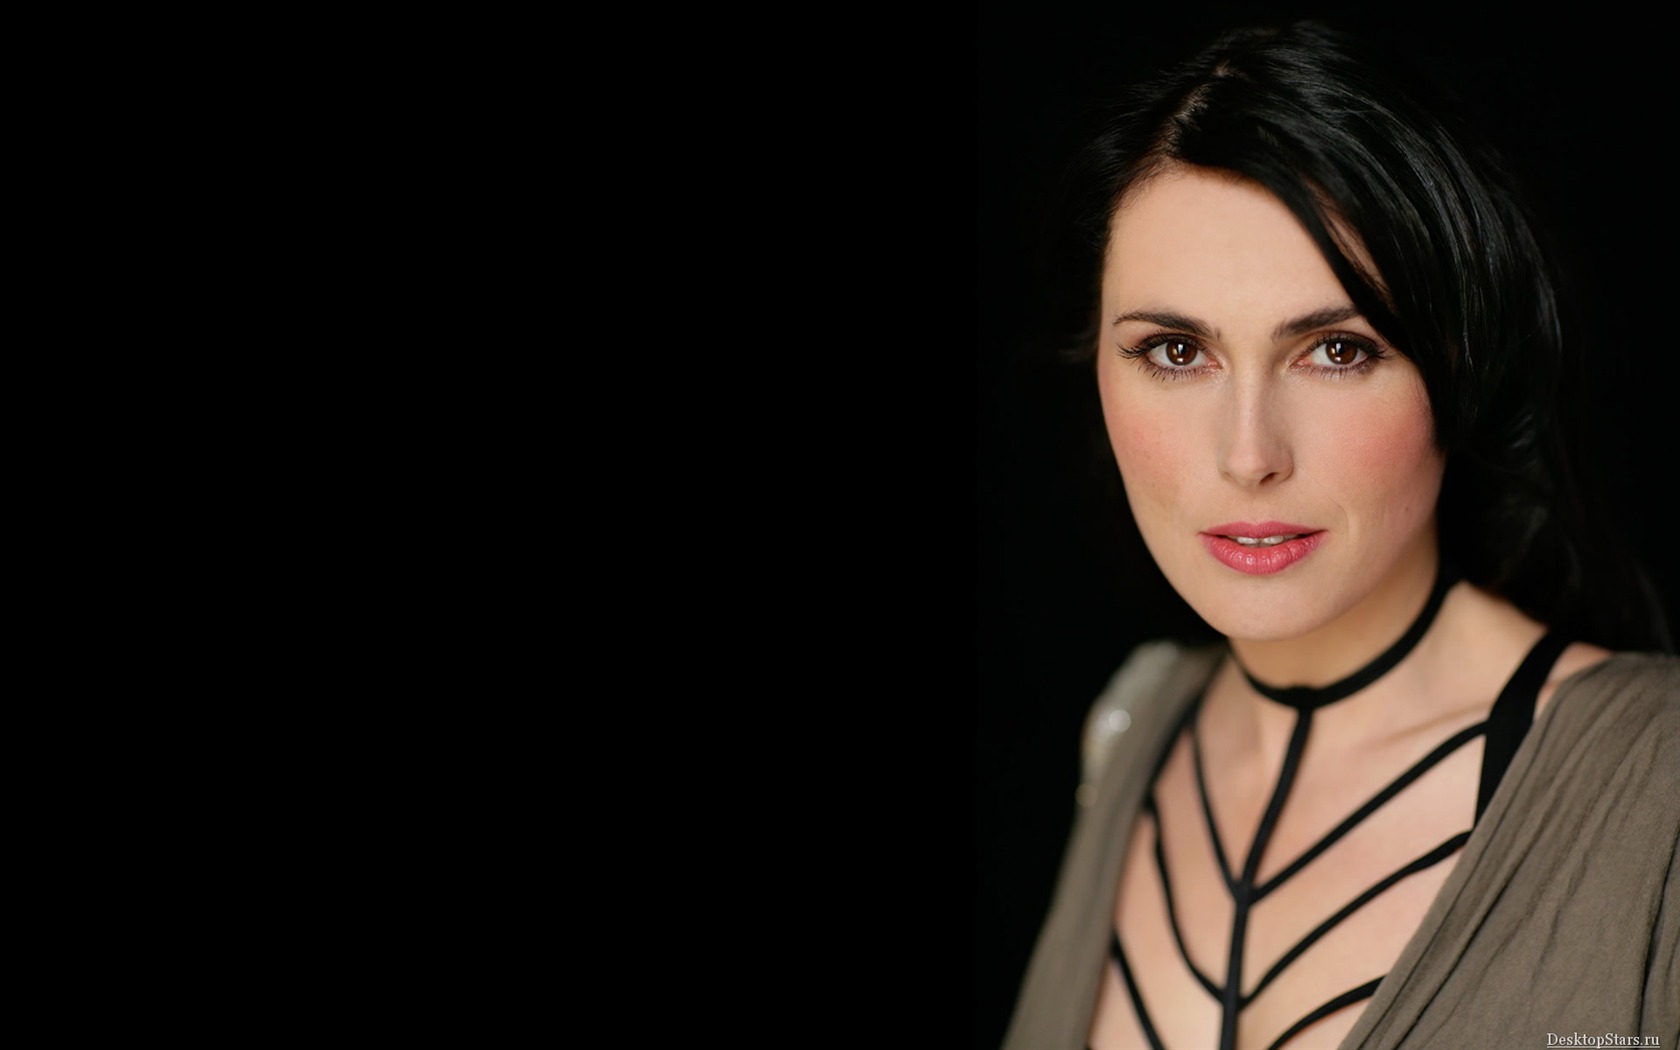 Sharon den Adel #005 - 1680x1050 Wallpapers Pictures Photos Images